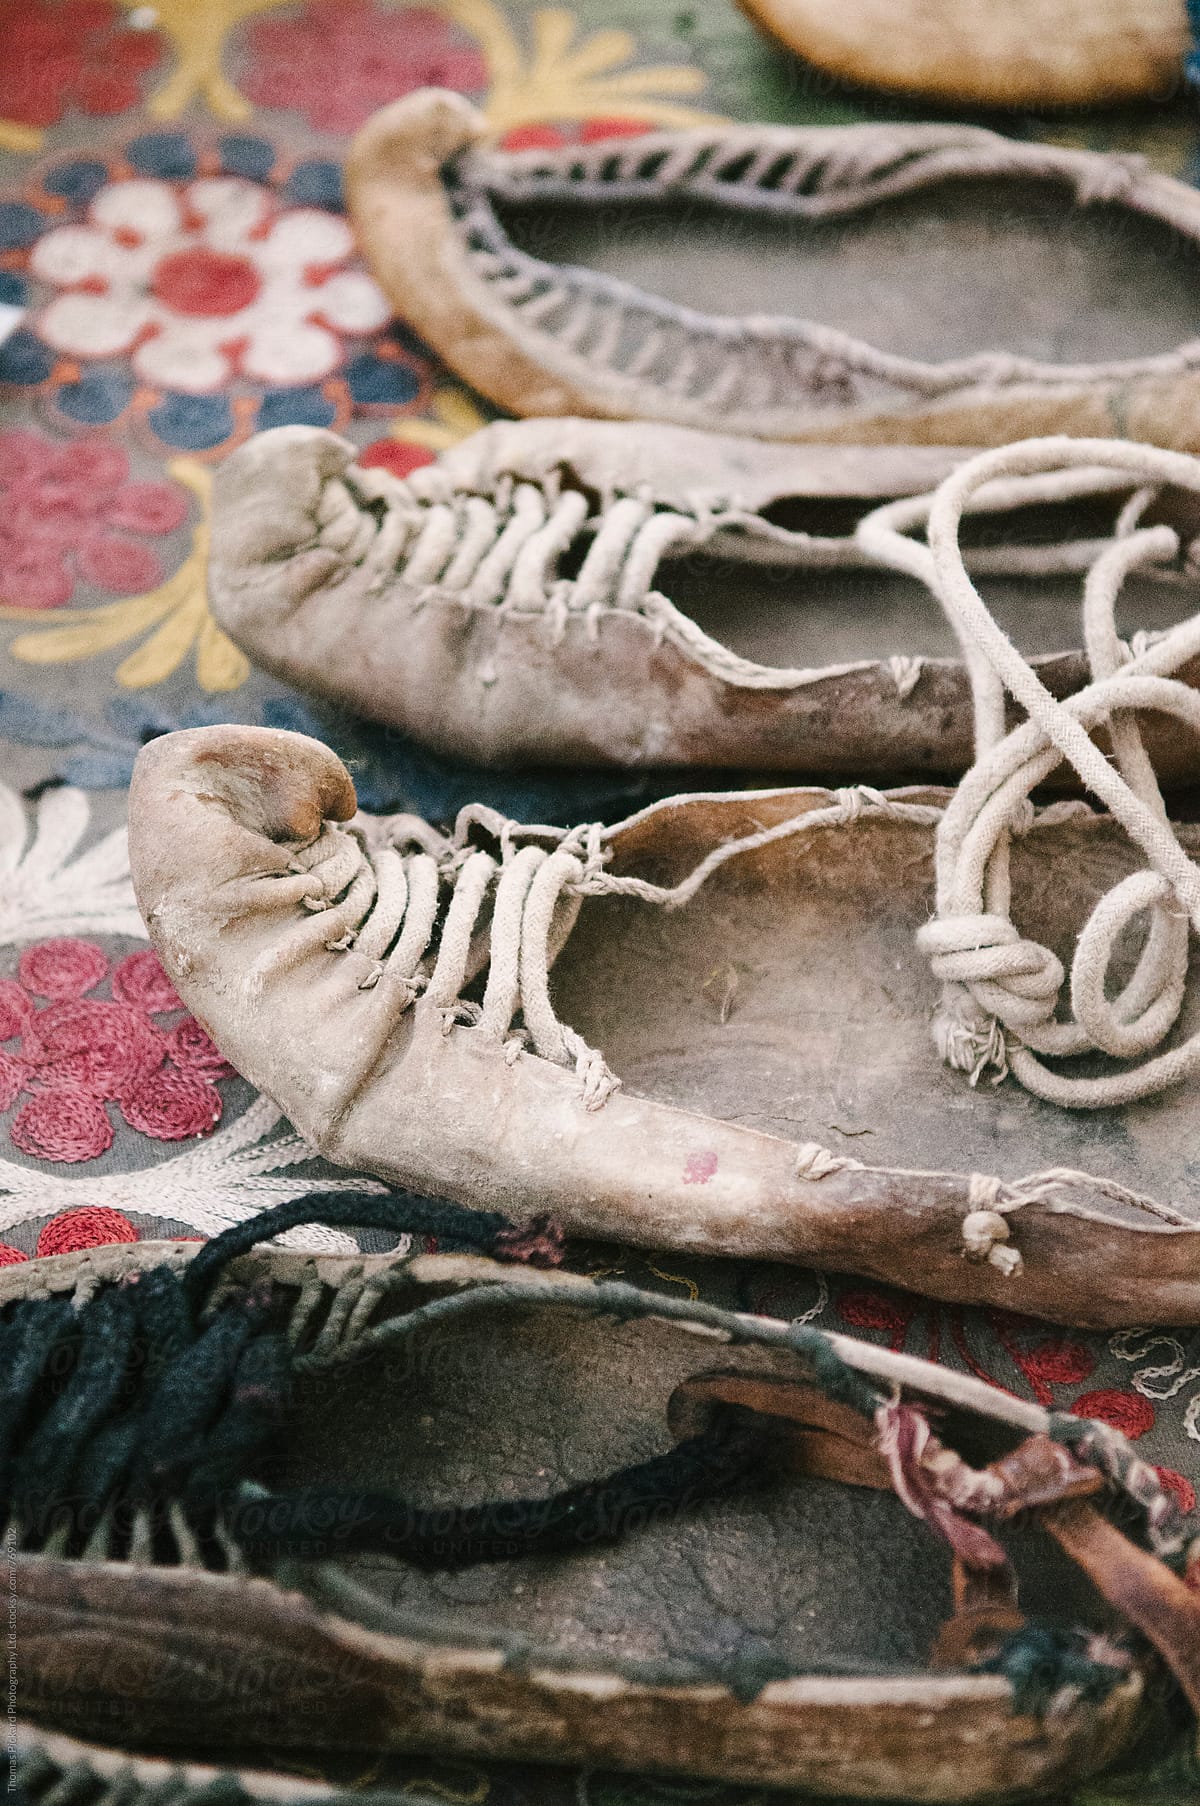 Old leather shoes, Xinaliq.